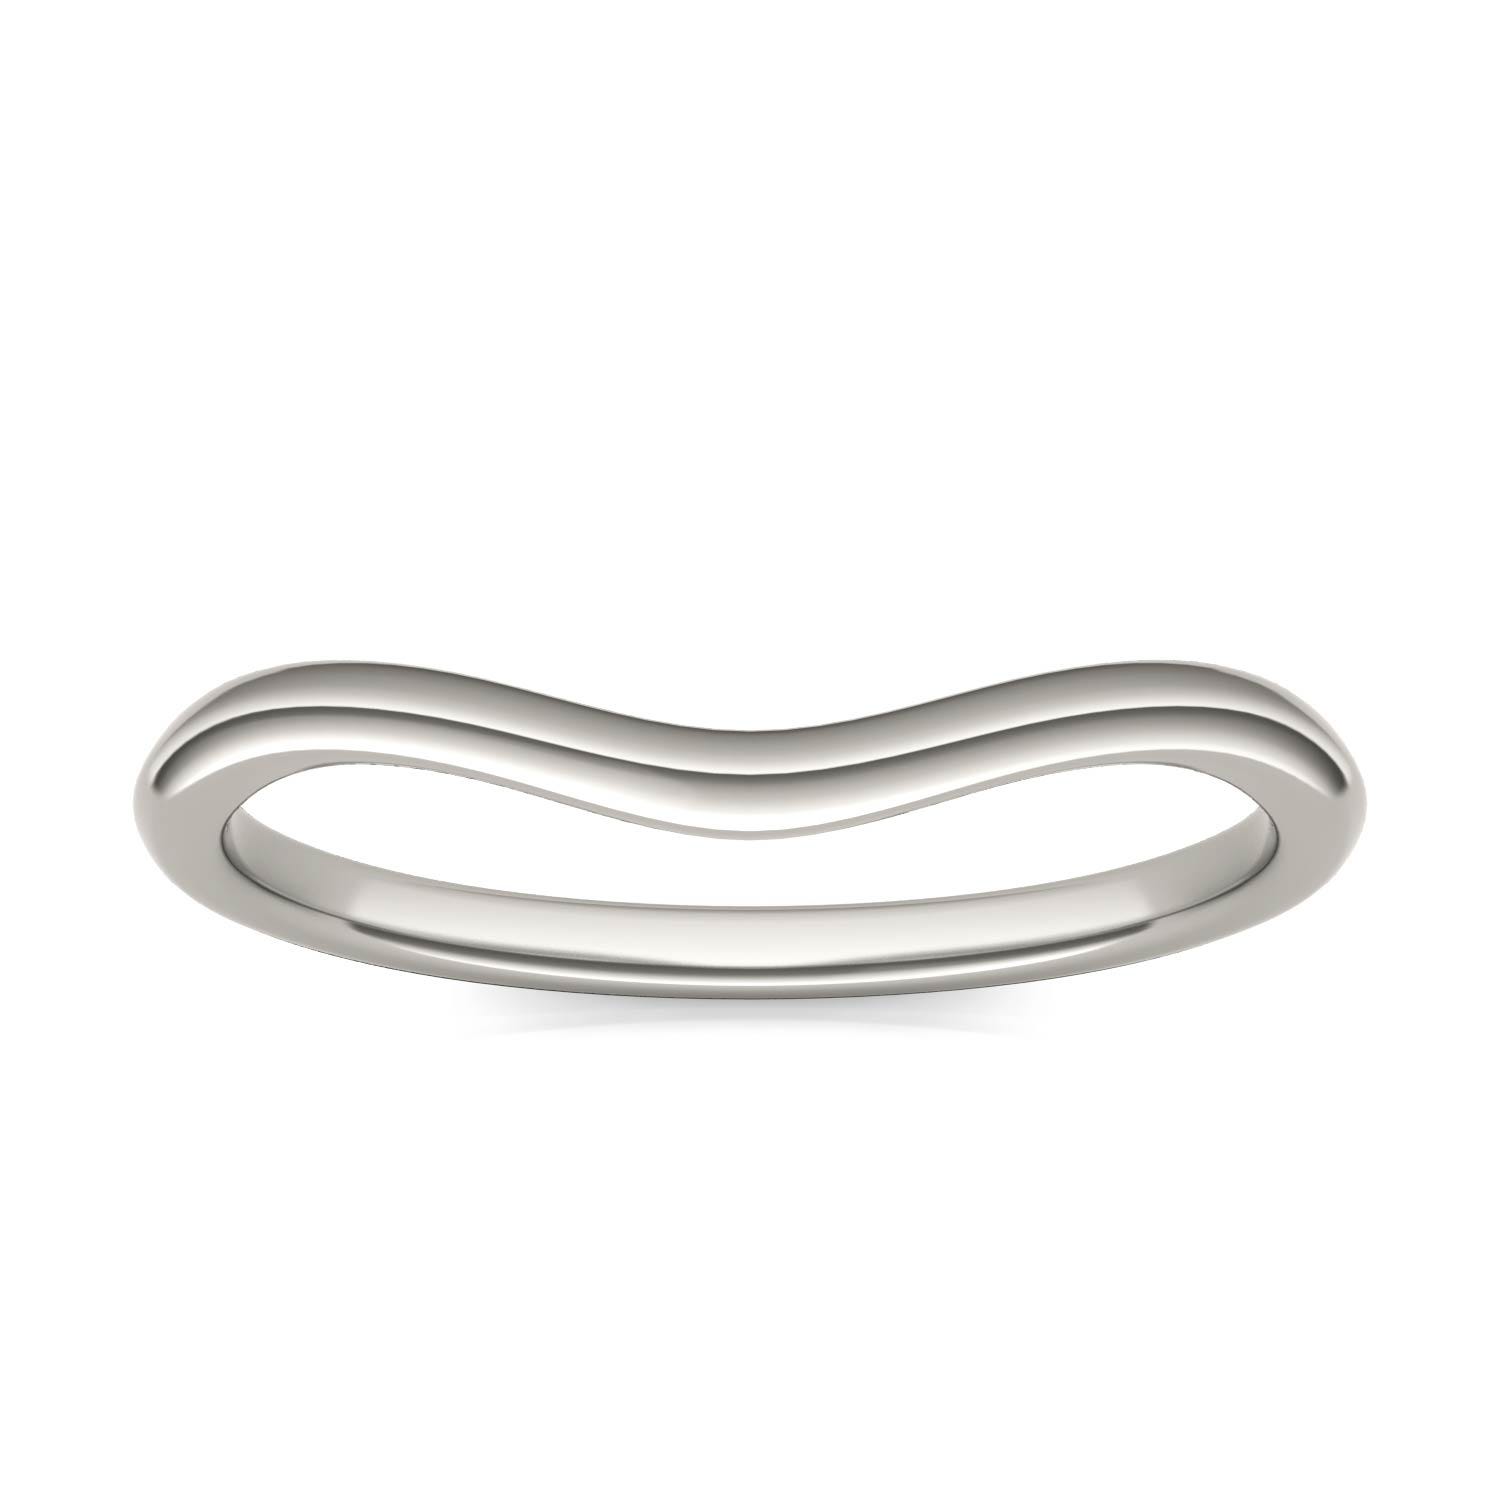 Signature Plain Matching Wedding Band Ring in 14K White Gold, Size: 6 / Charles & Colvard